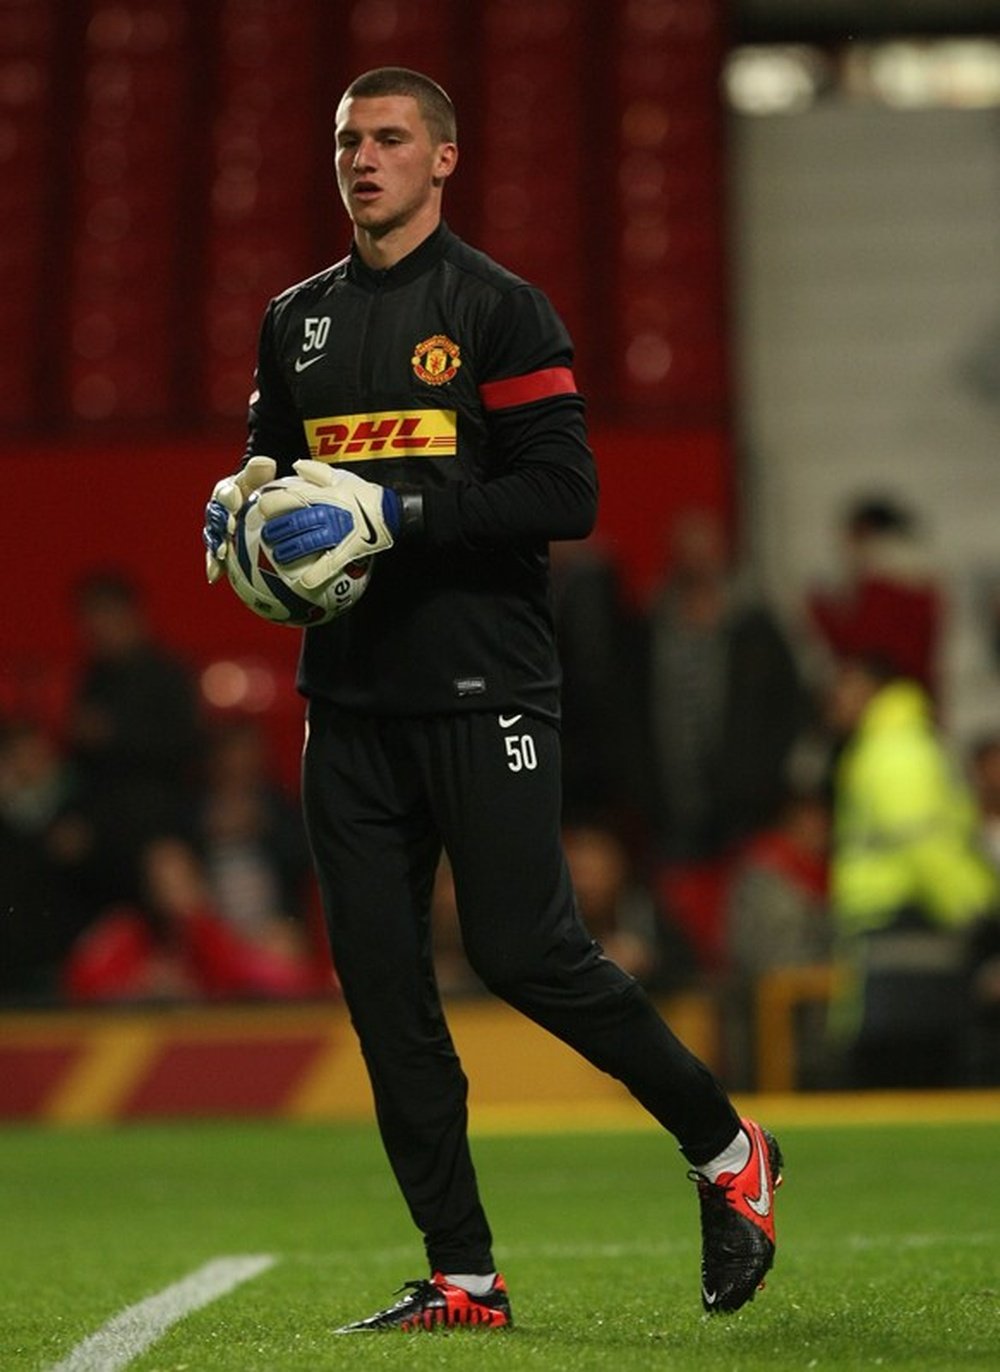 Johnstone will not leave the club. ManUtd